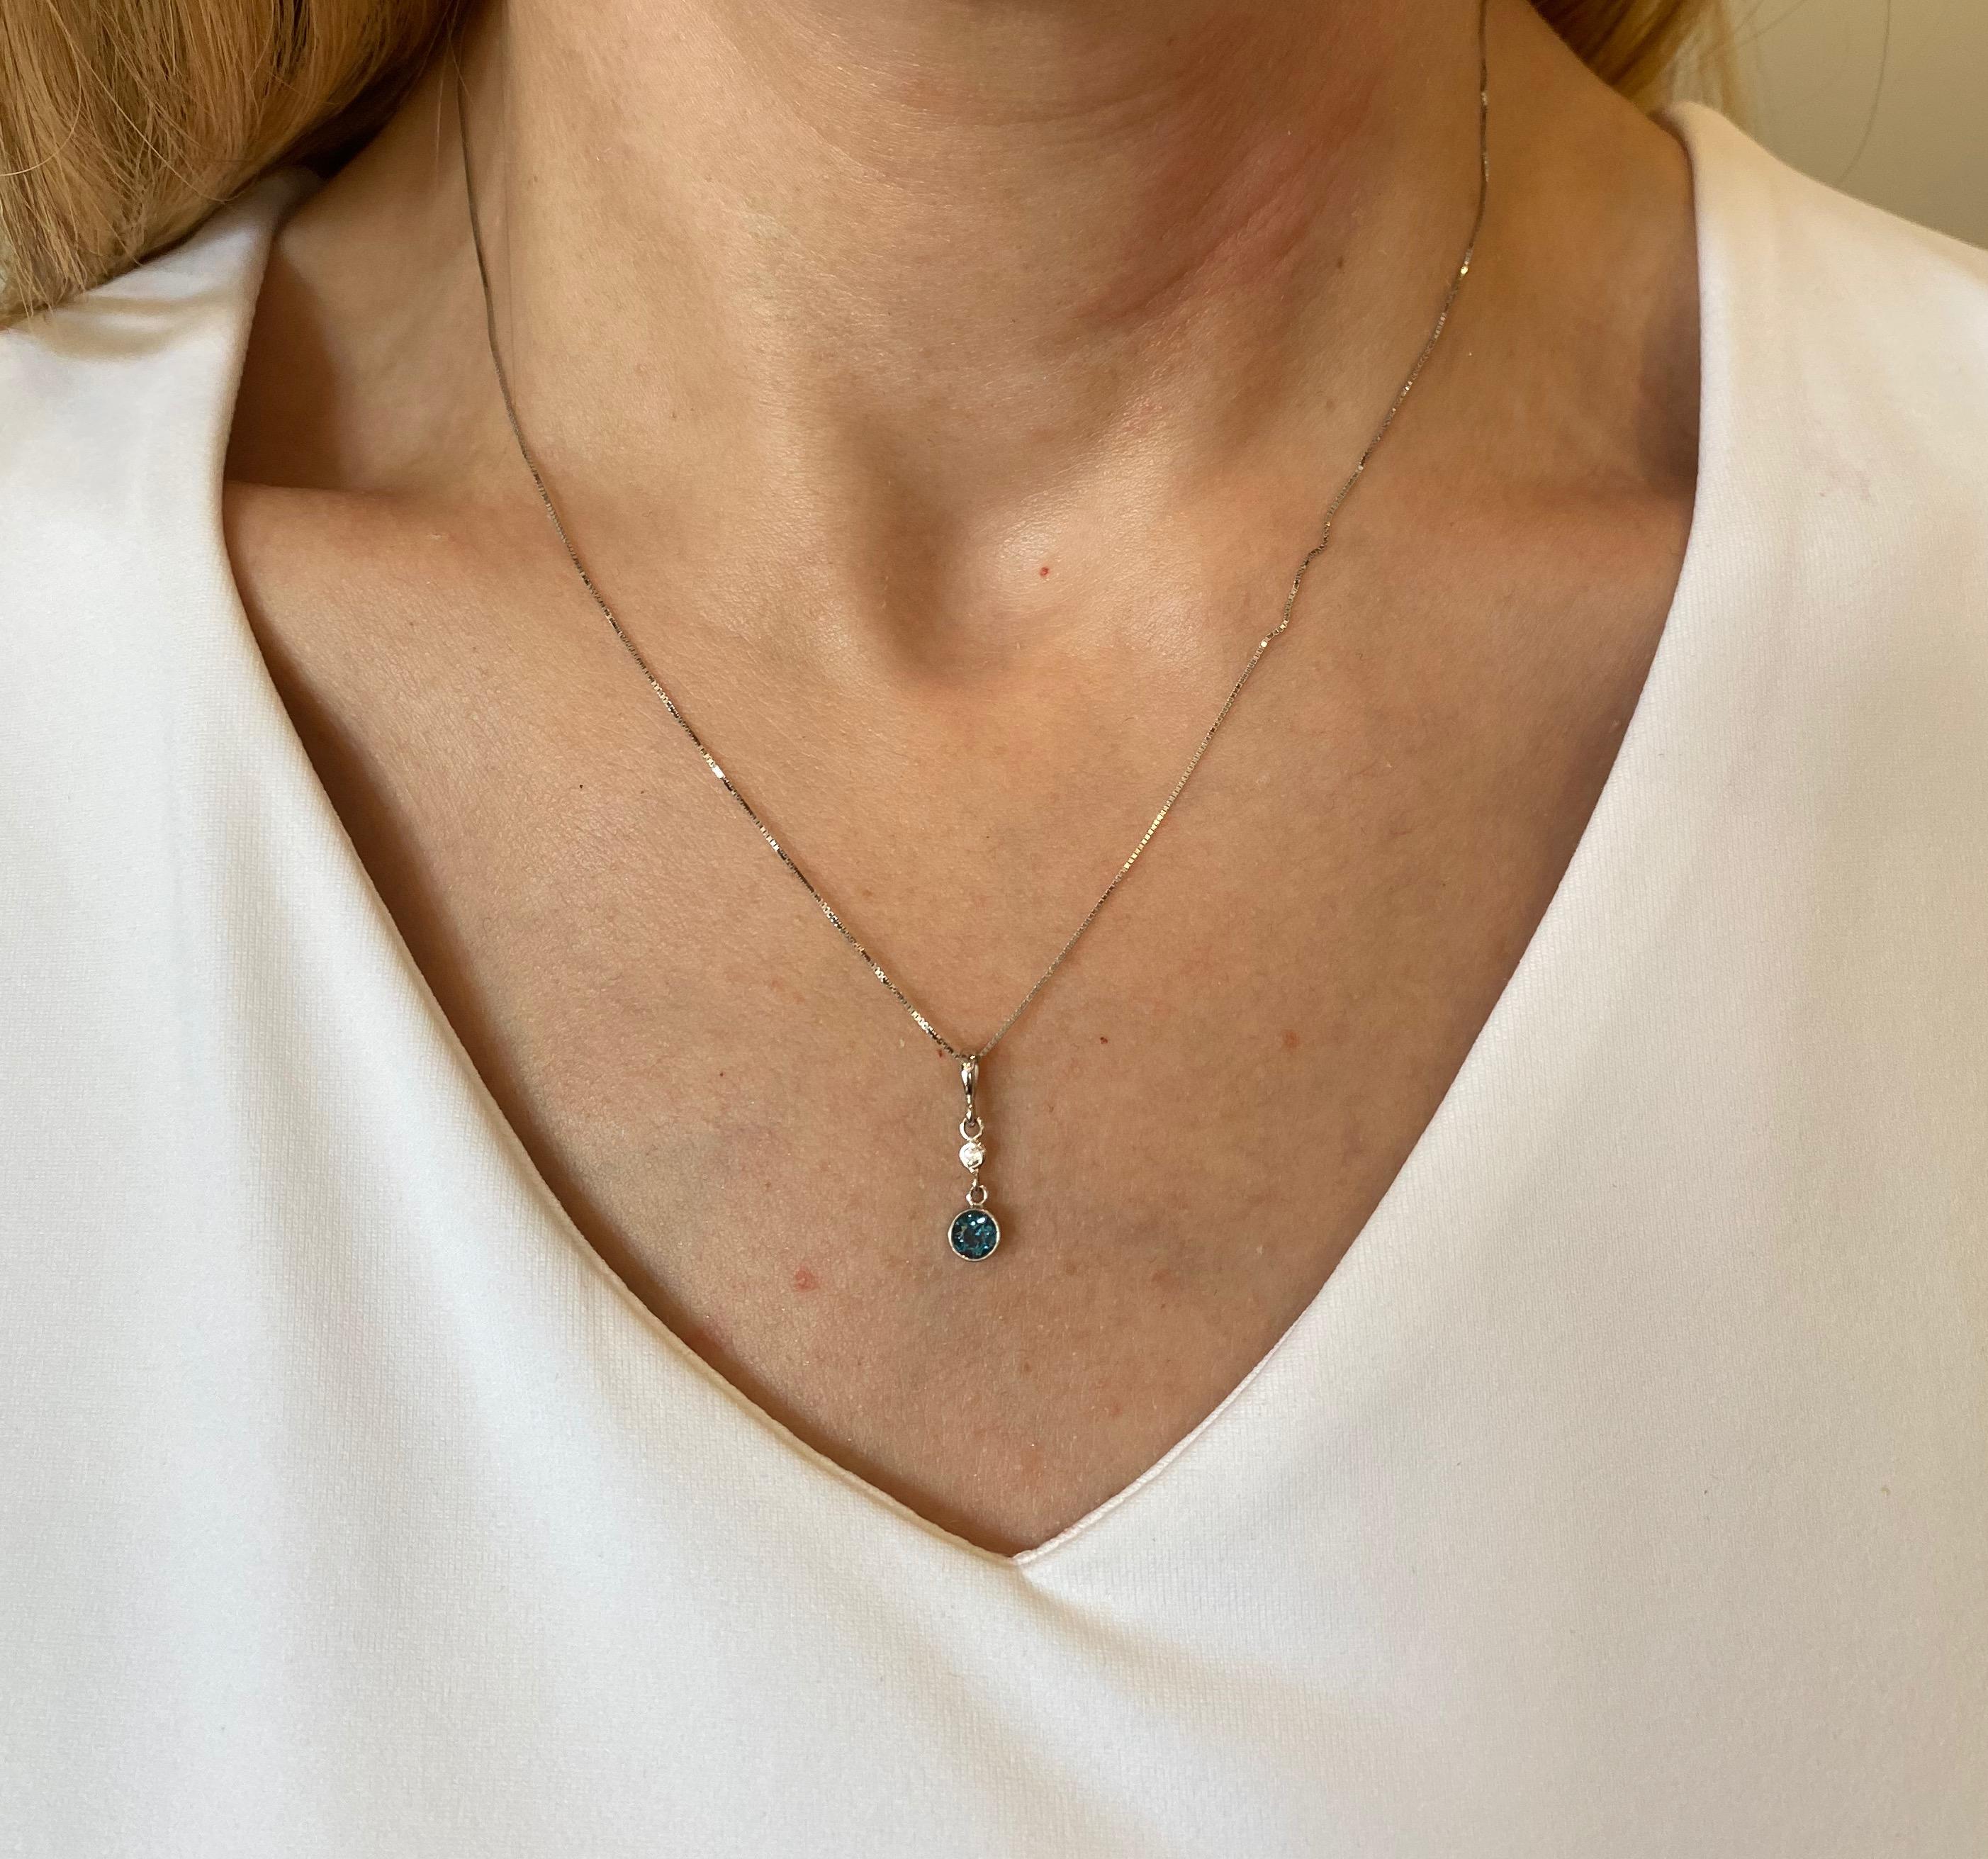 Round Cut London Blue Topaz & Diamond Necklace and Earring Set in 18 Karat White Gold